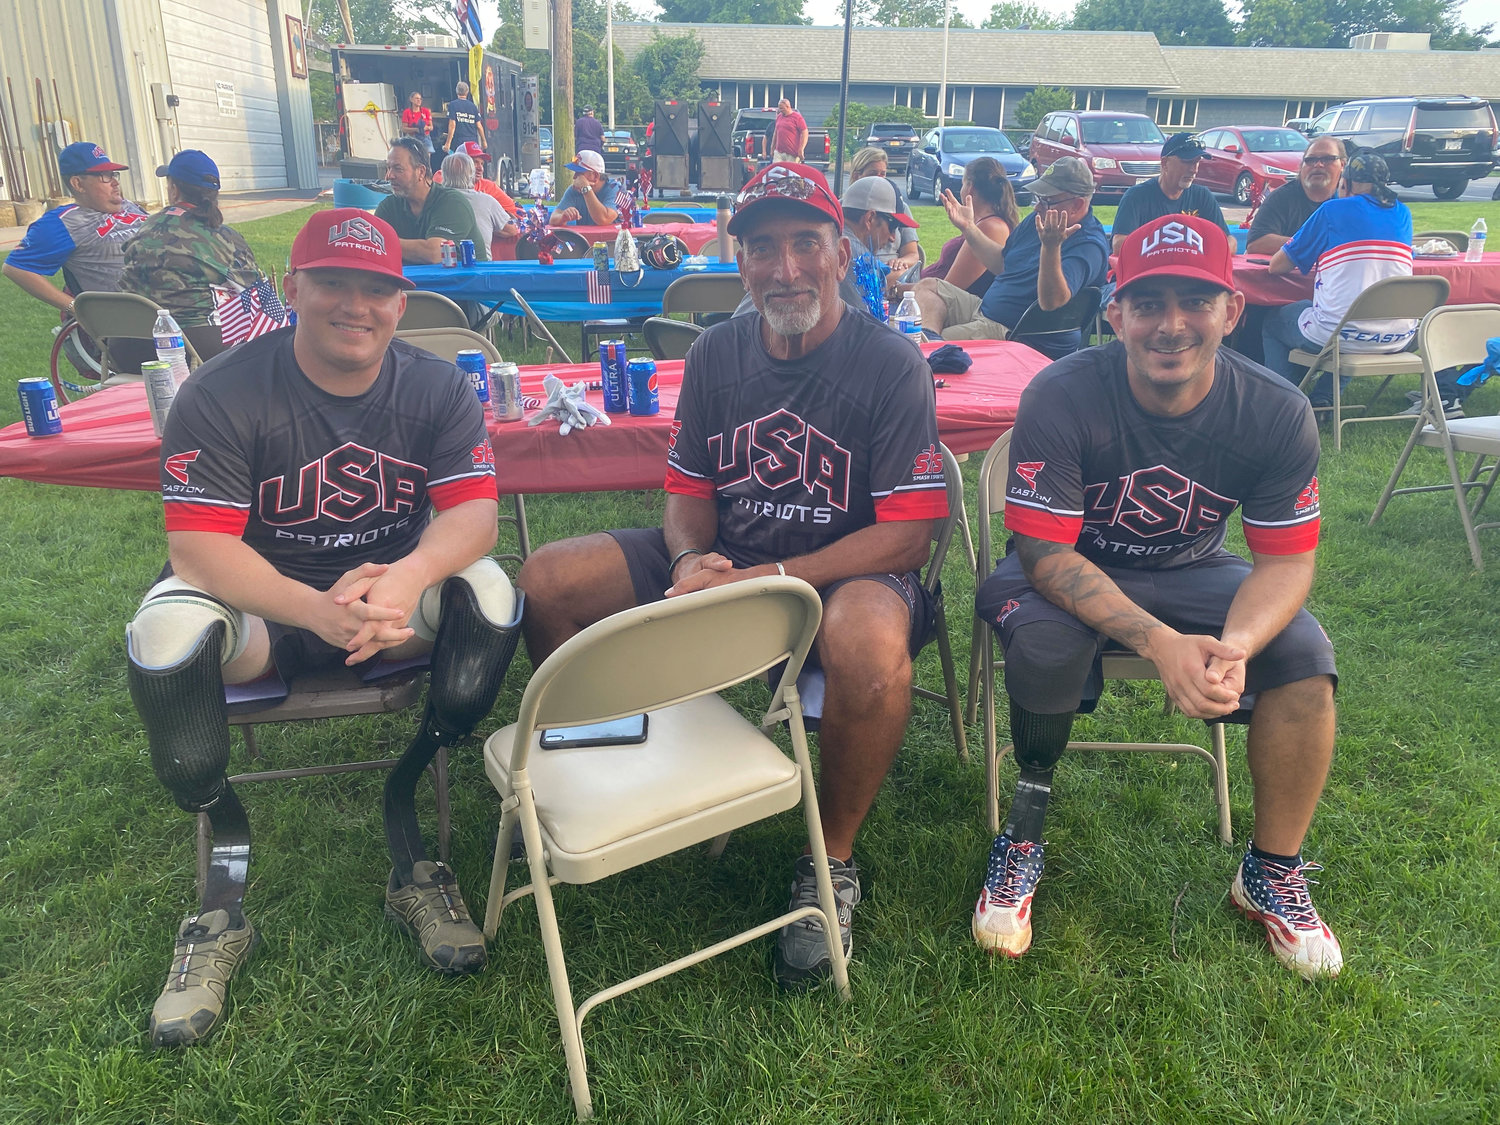 Players Josh Wiege, Kai Schjang and Nick Salerno at an outdoor barbecue held after the game at the Blue Point Fire Department.